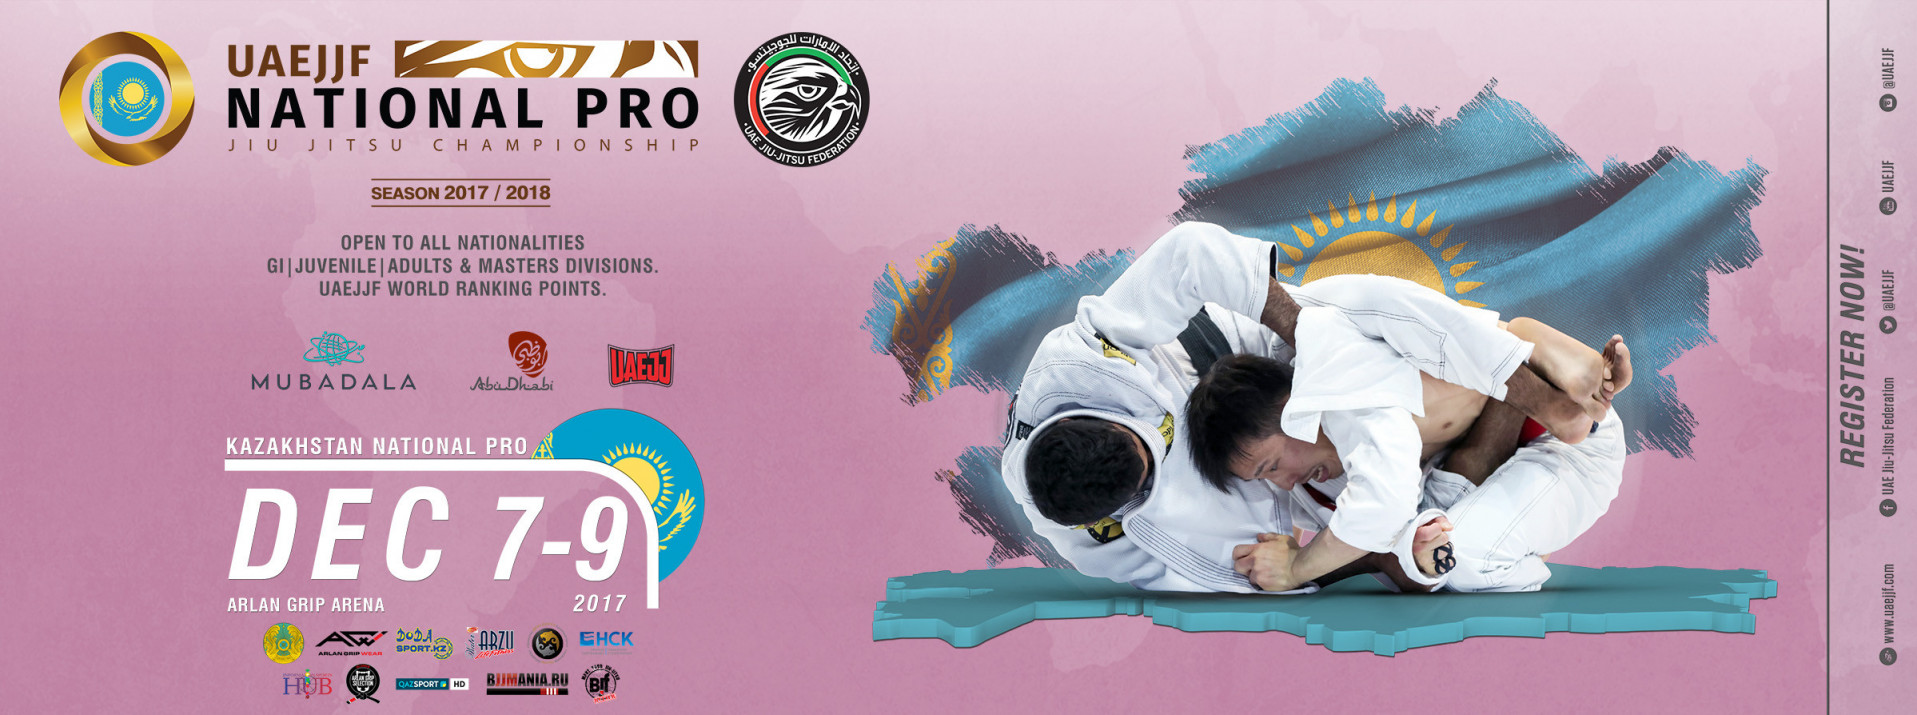 UAE Under-16 Jiu-Jitsu Team completes weigh-in for youth world championship  in Kazakhstan - Sports - Local - Emirates24